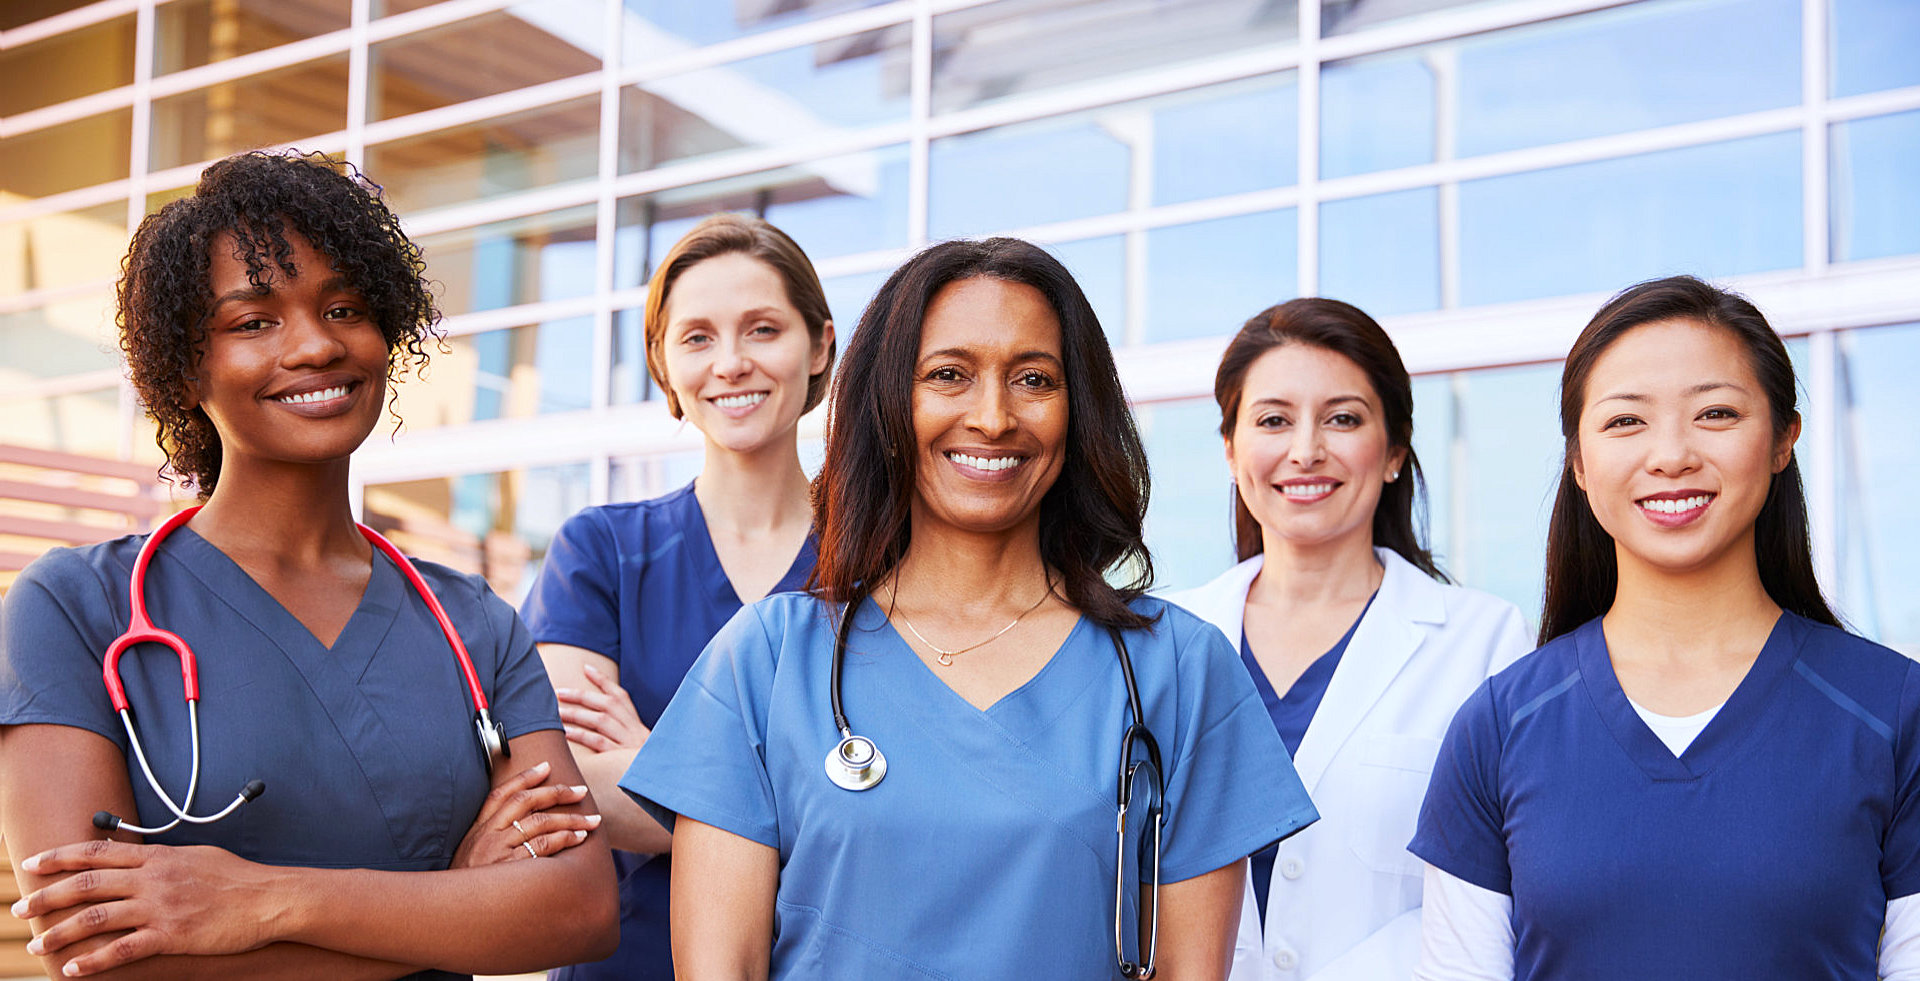 group of medical professional smiling